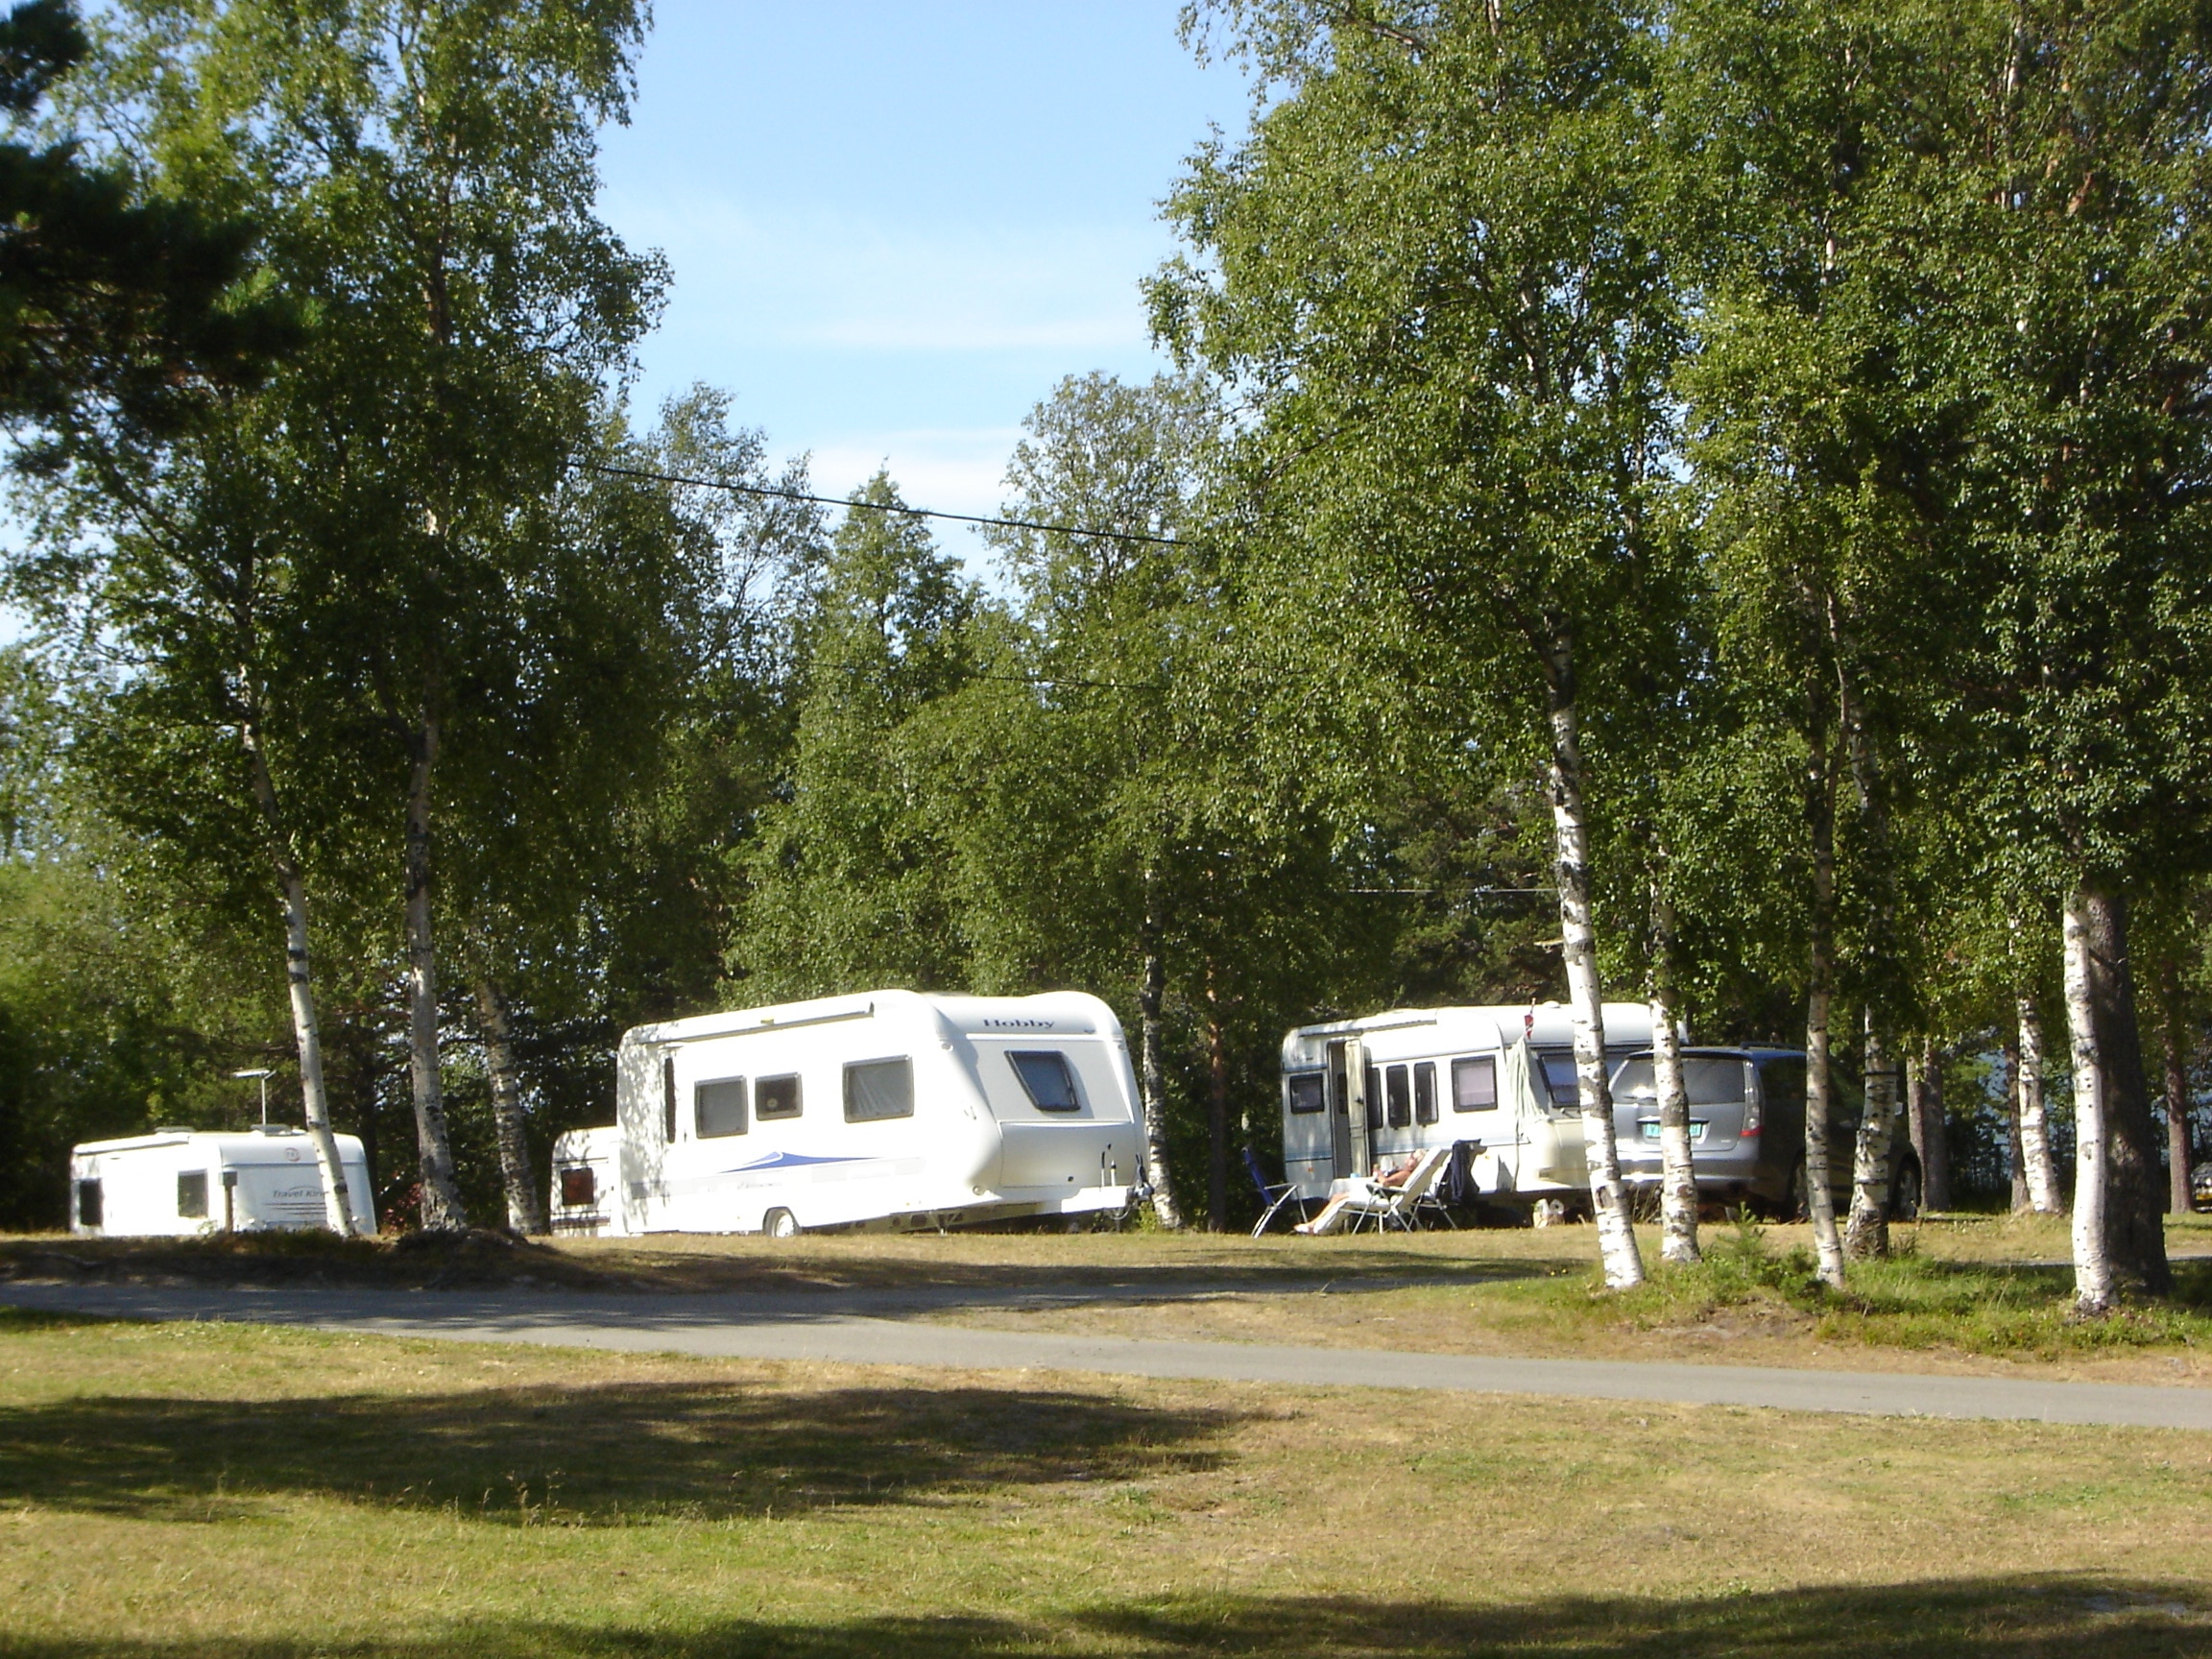 Fauske Camping & Motell AS